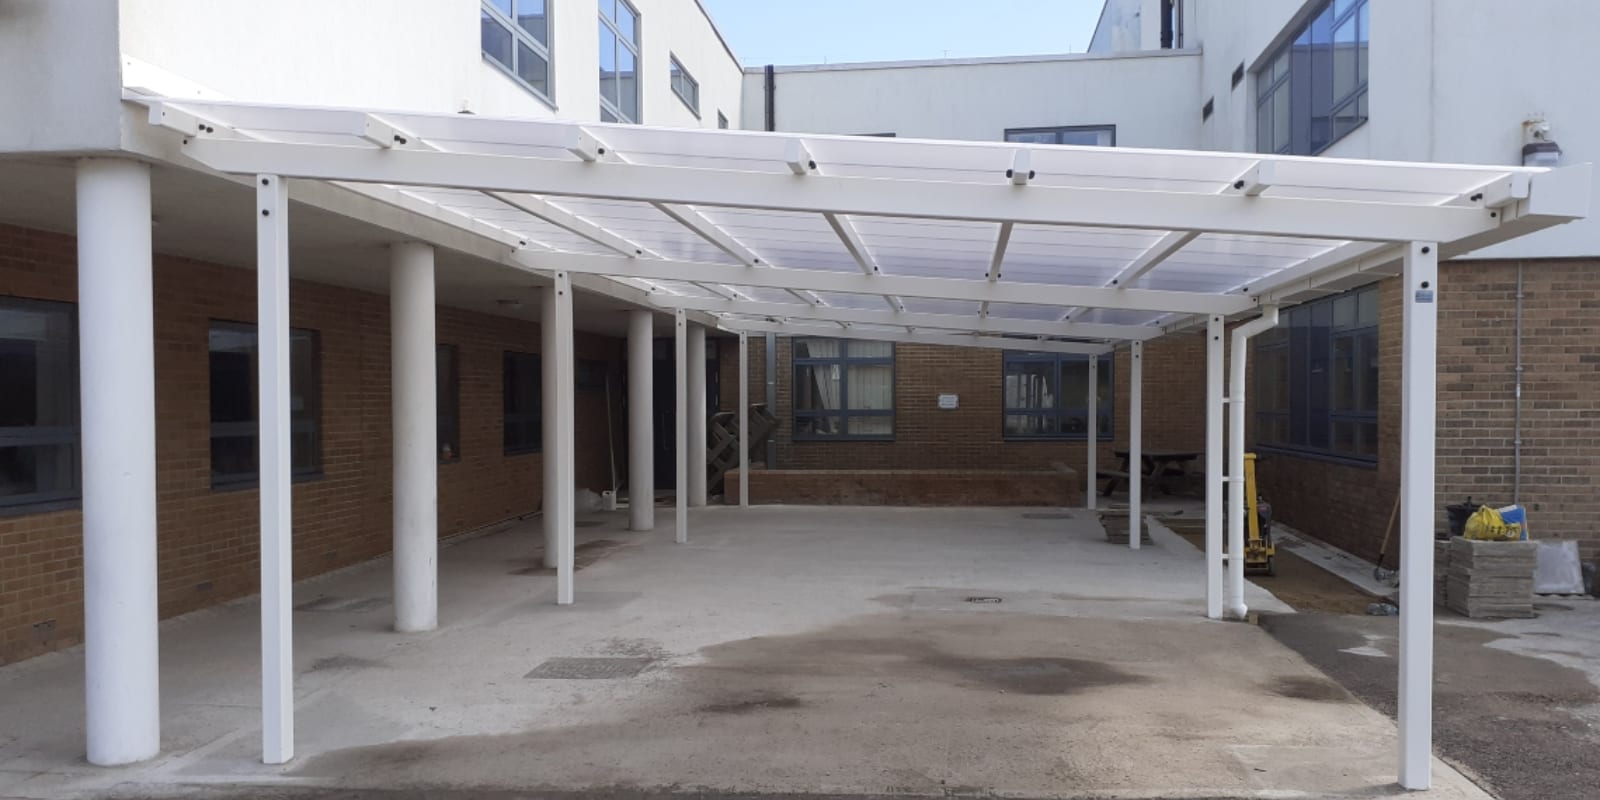 Straight roof canopy we fitted at Seahaven Academy